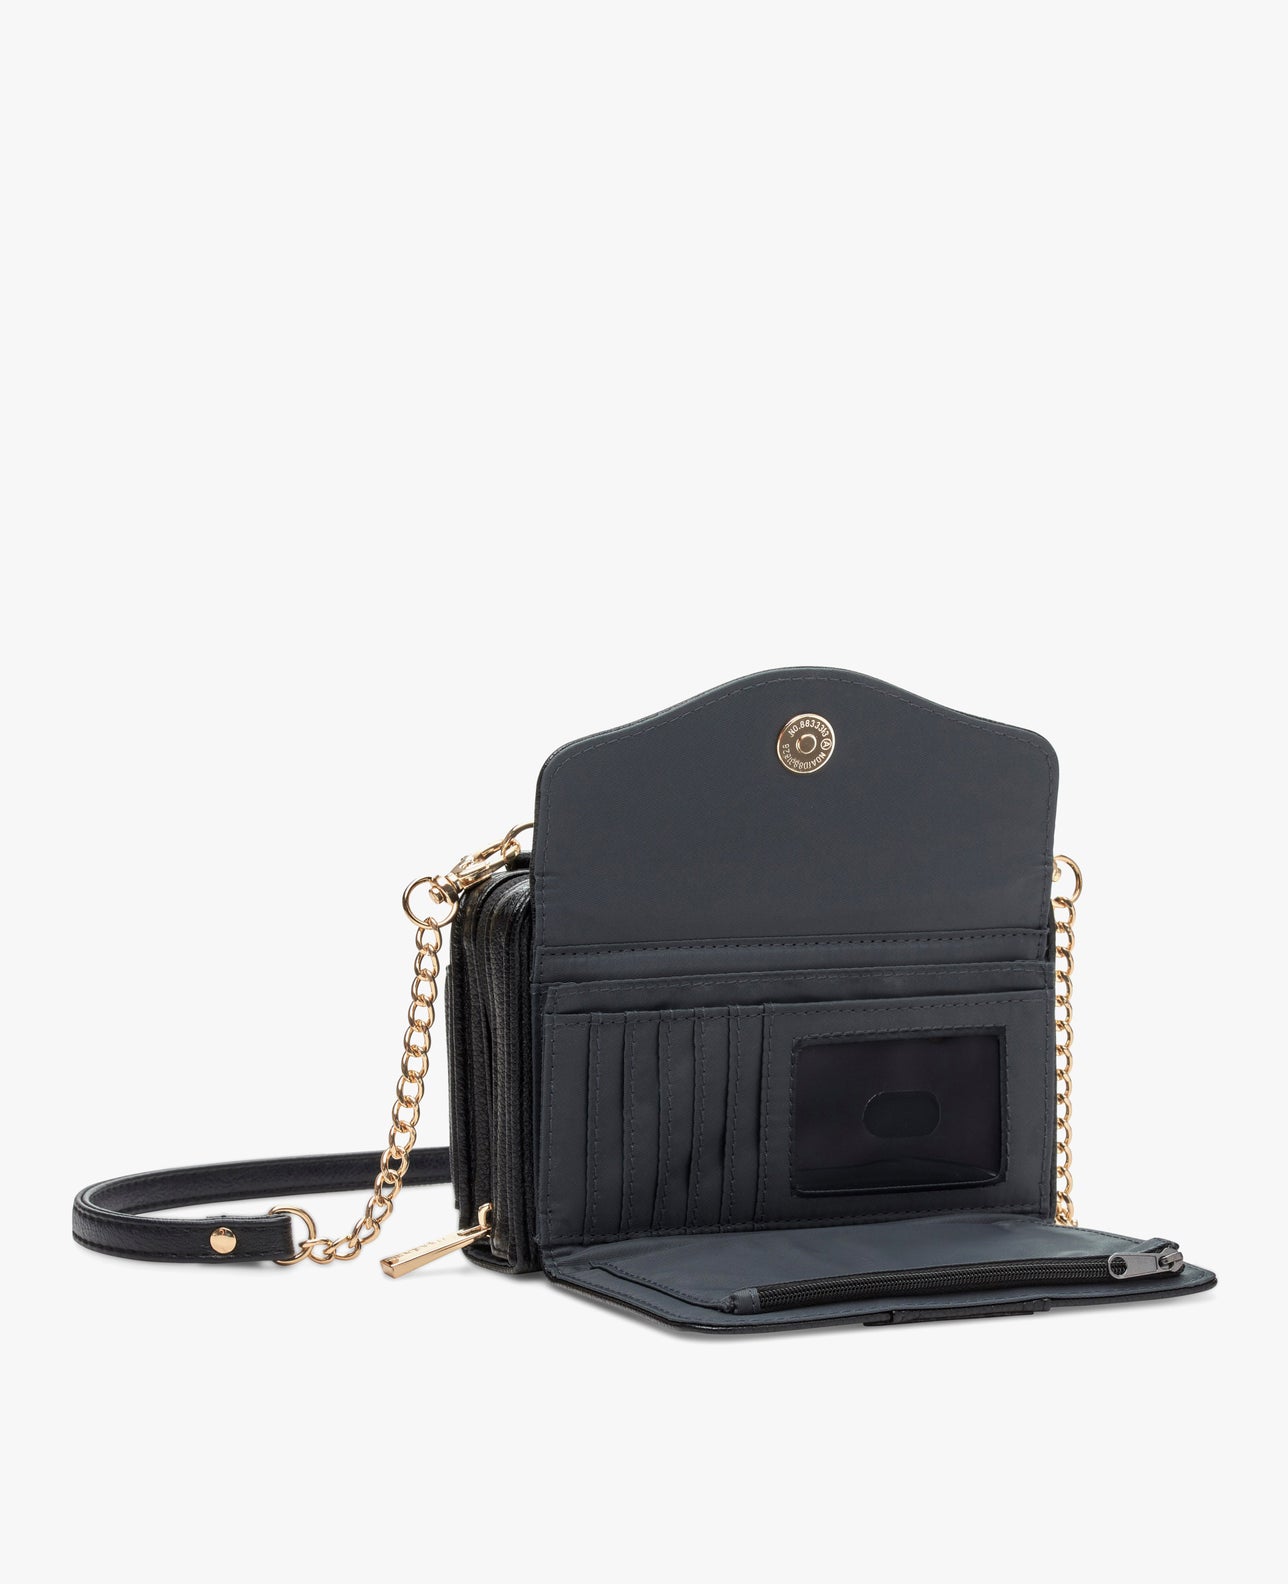 color:black with gold hardware